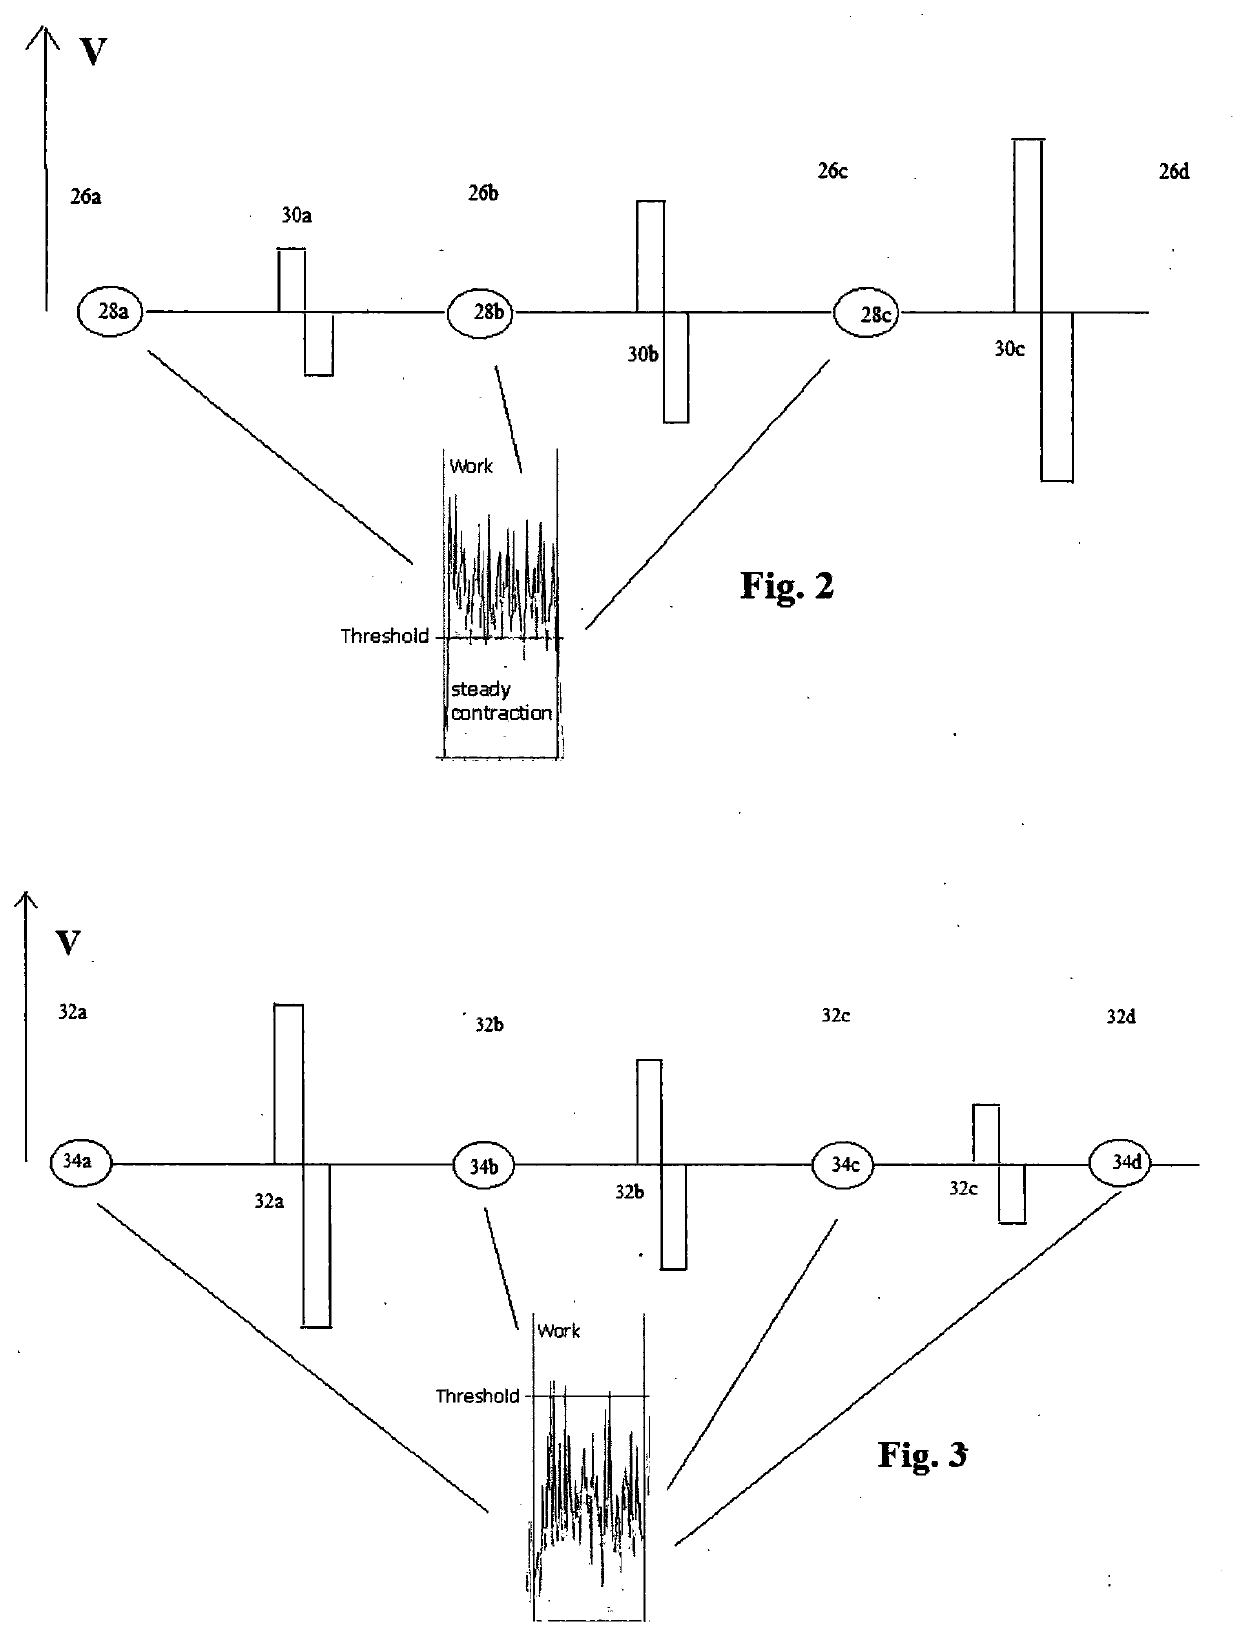 Apparatus for neuromuscular stimulation